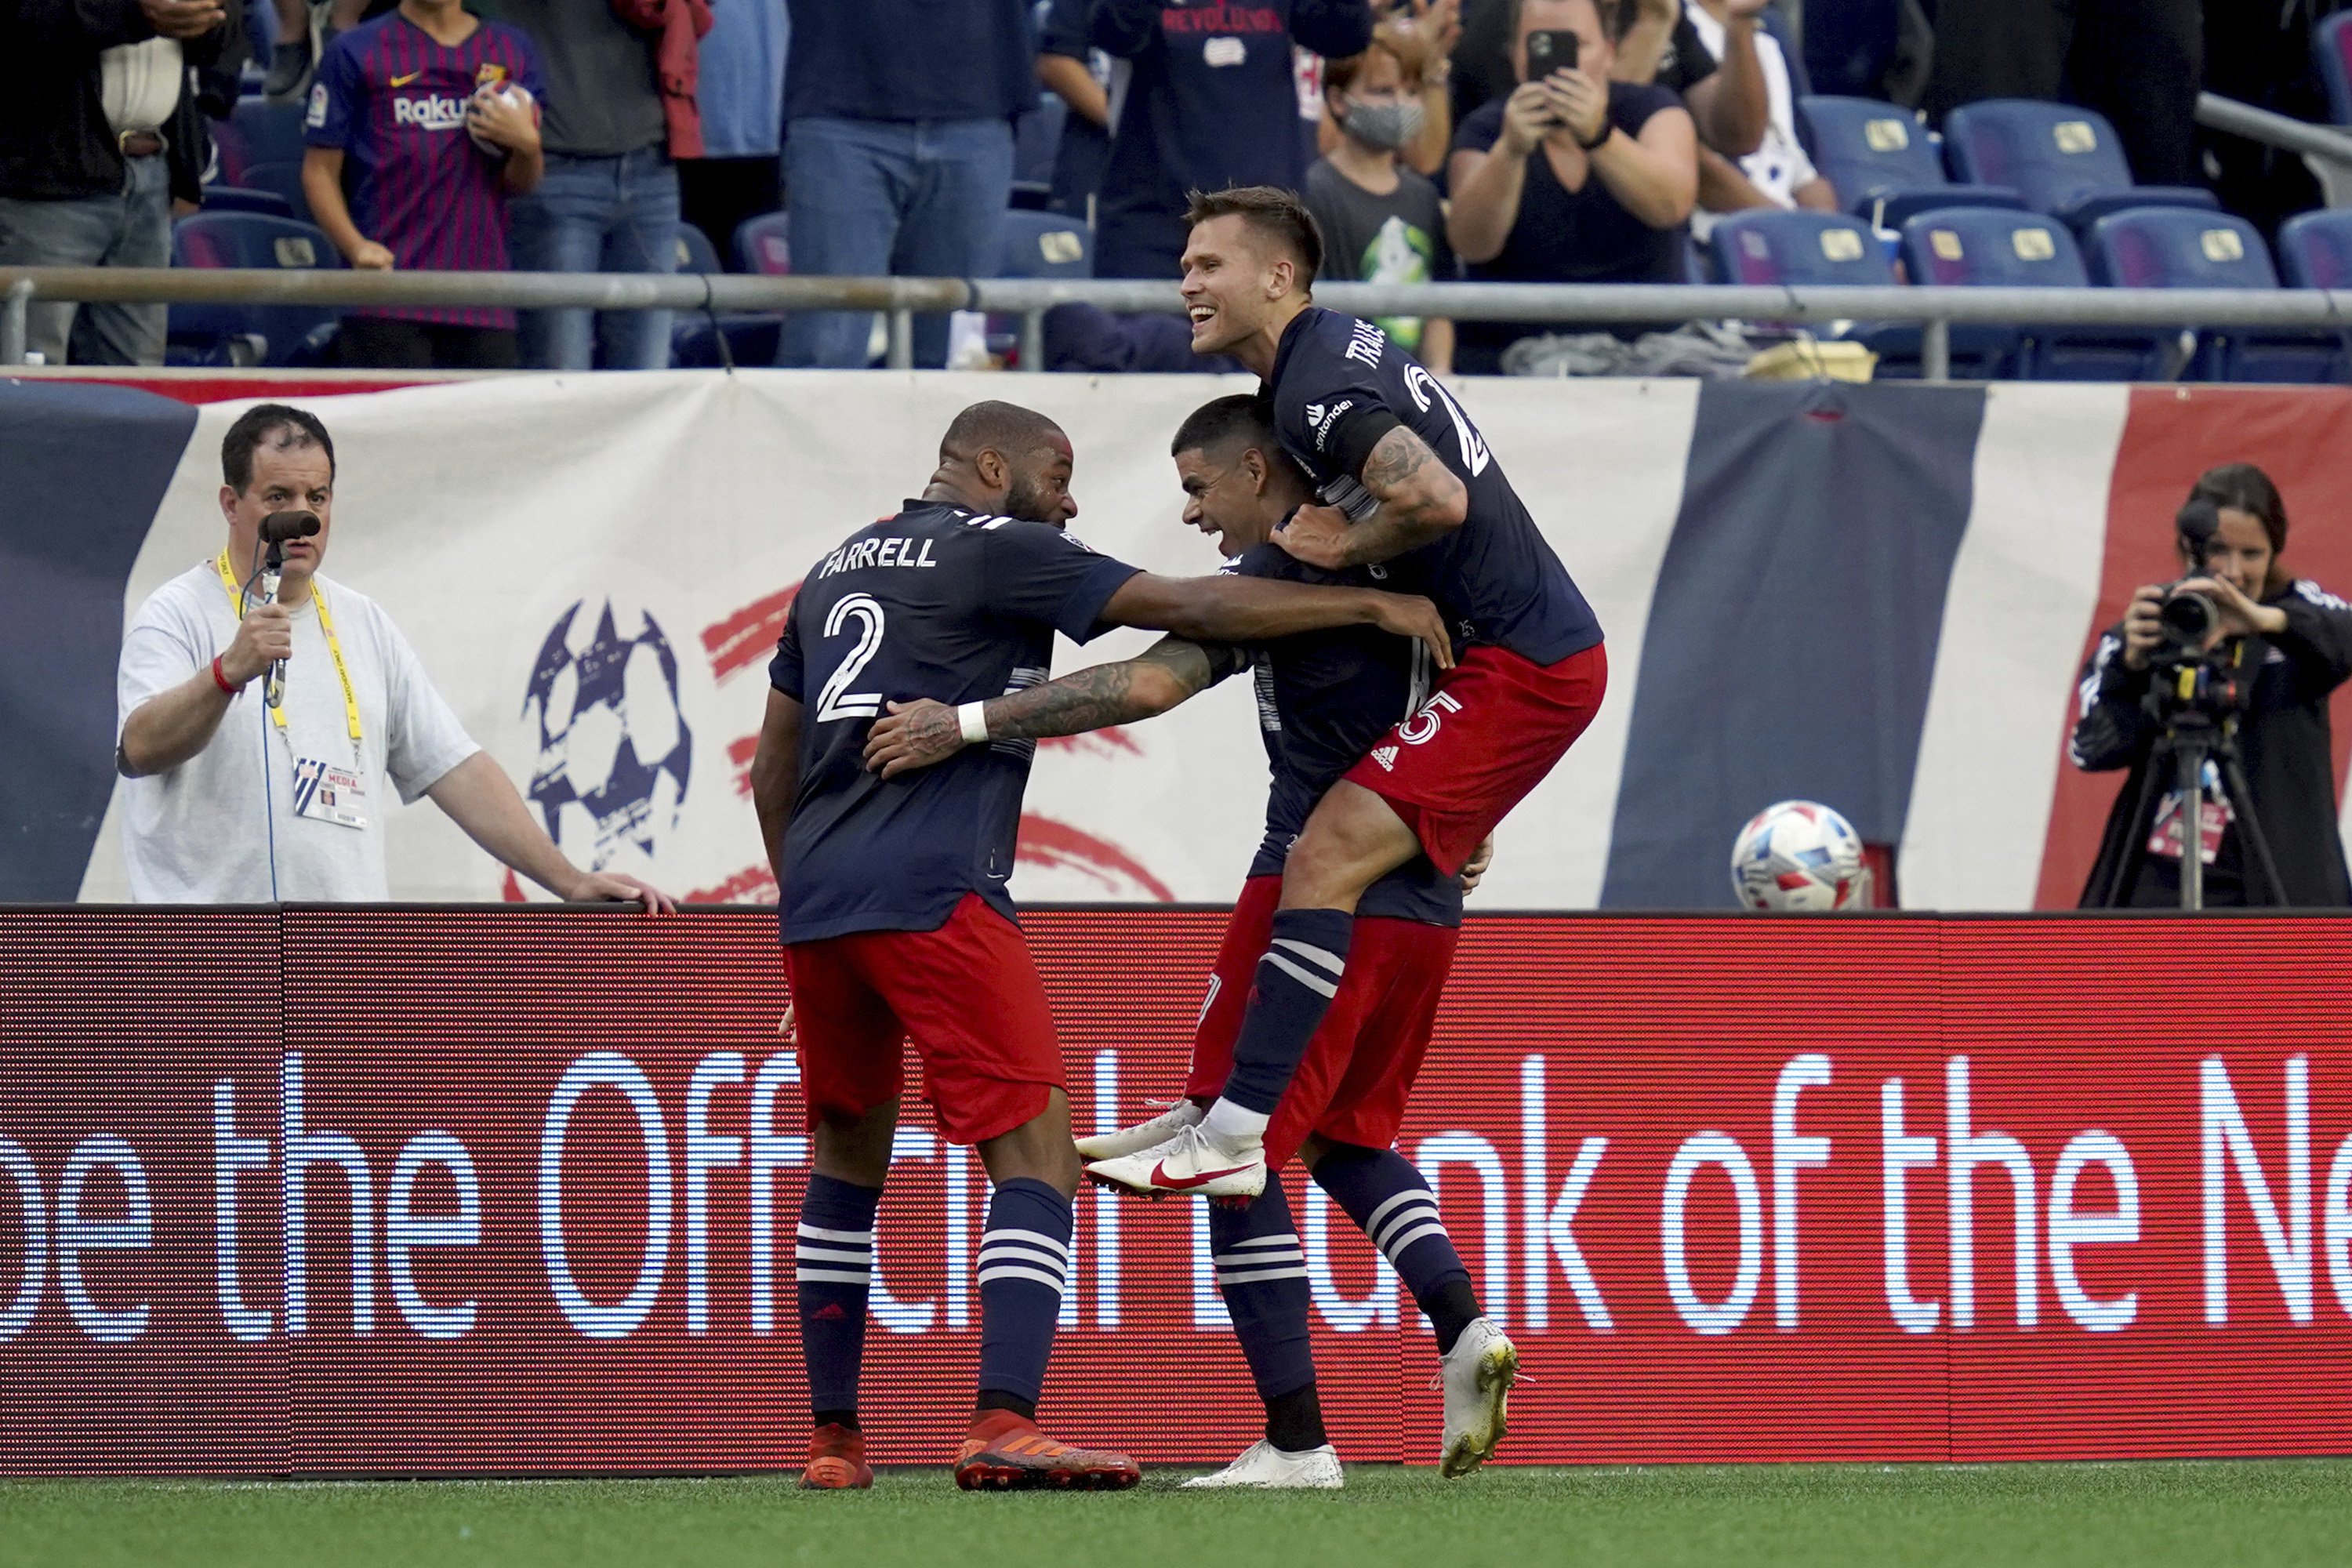 New England Revolution: Gustavo Bou leads the way to victory